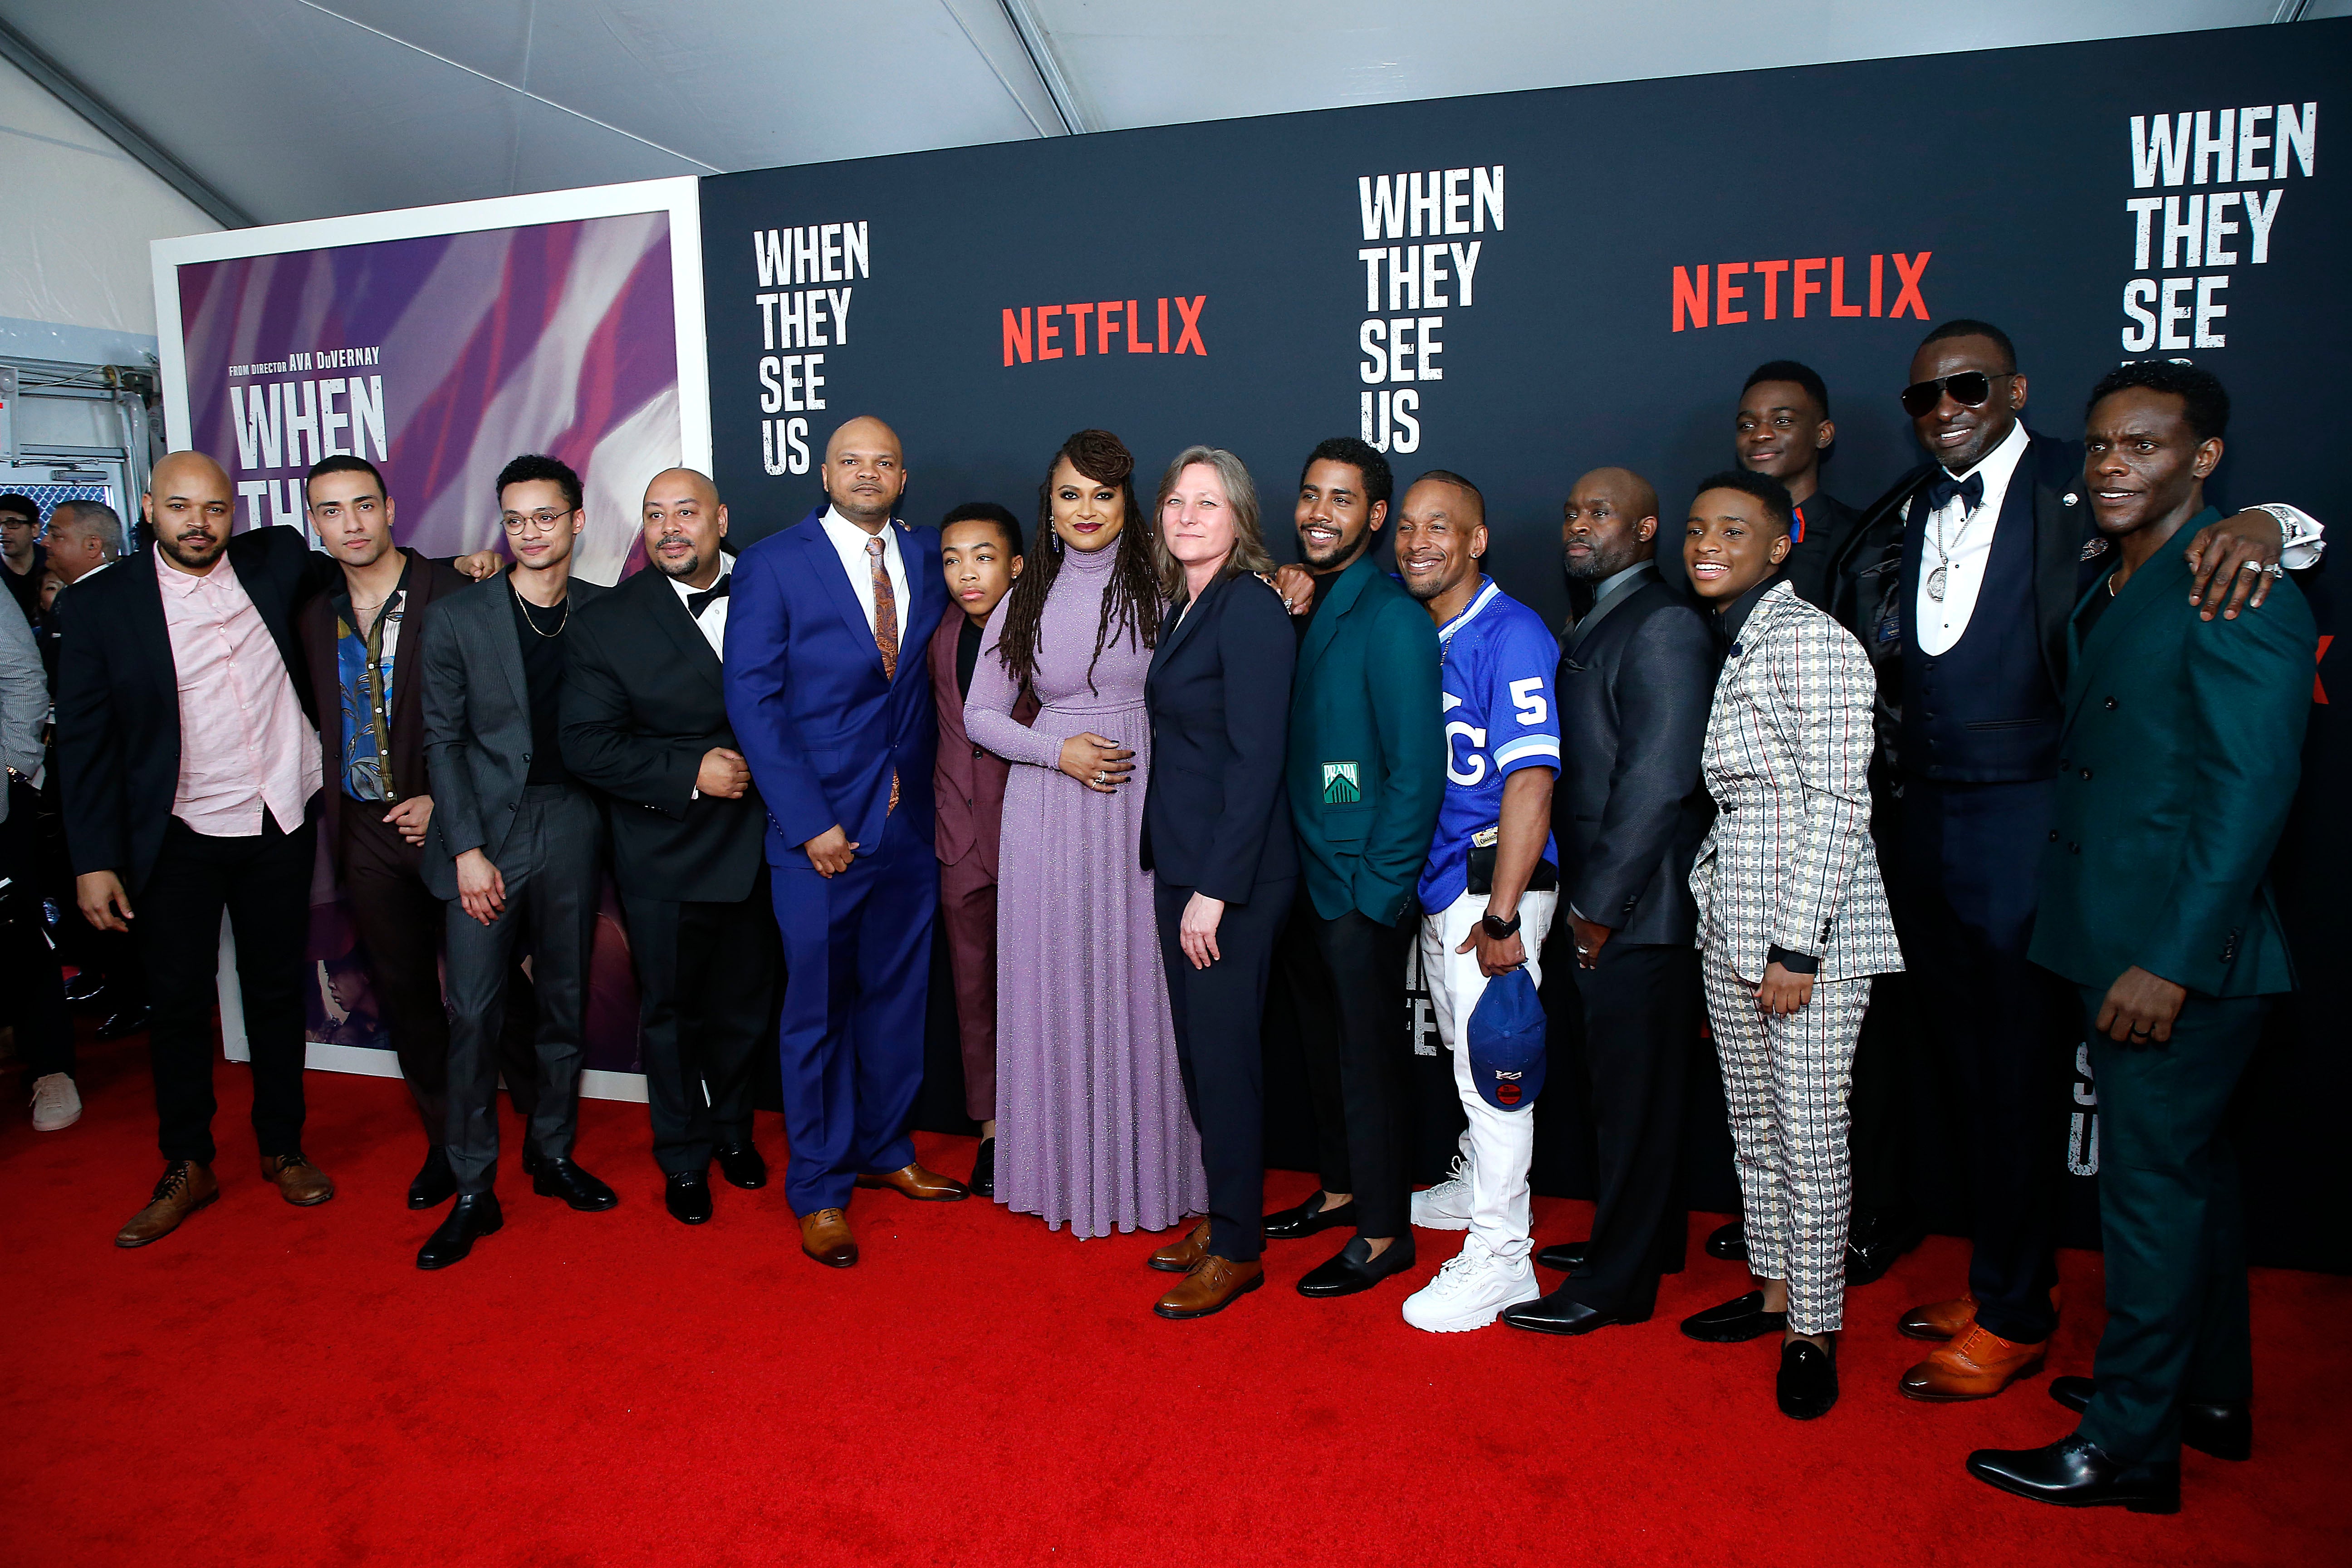 The Cast Of ‘When They See Us’ Contemplates Freedom For Black Boys In America